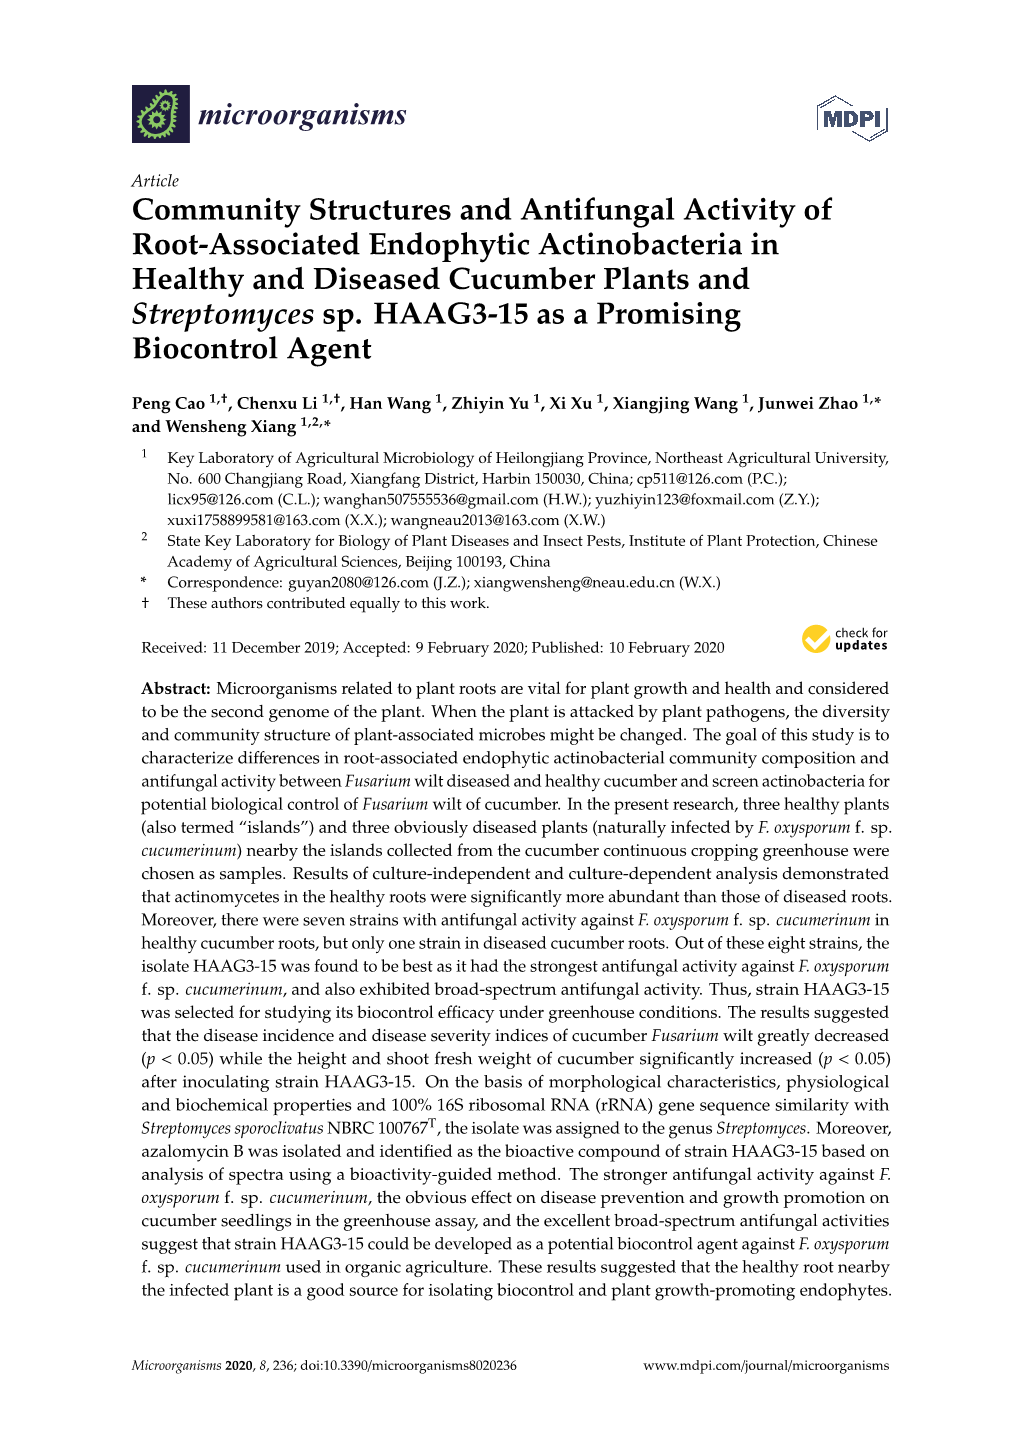 Community Structures and Antifungal Activity of Root-Associated Endophytic Actinobacteria in Healthy and Diseased Cucumber Plants and Streptomyces Sp. HAAG3-15 As a Promising